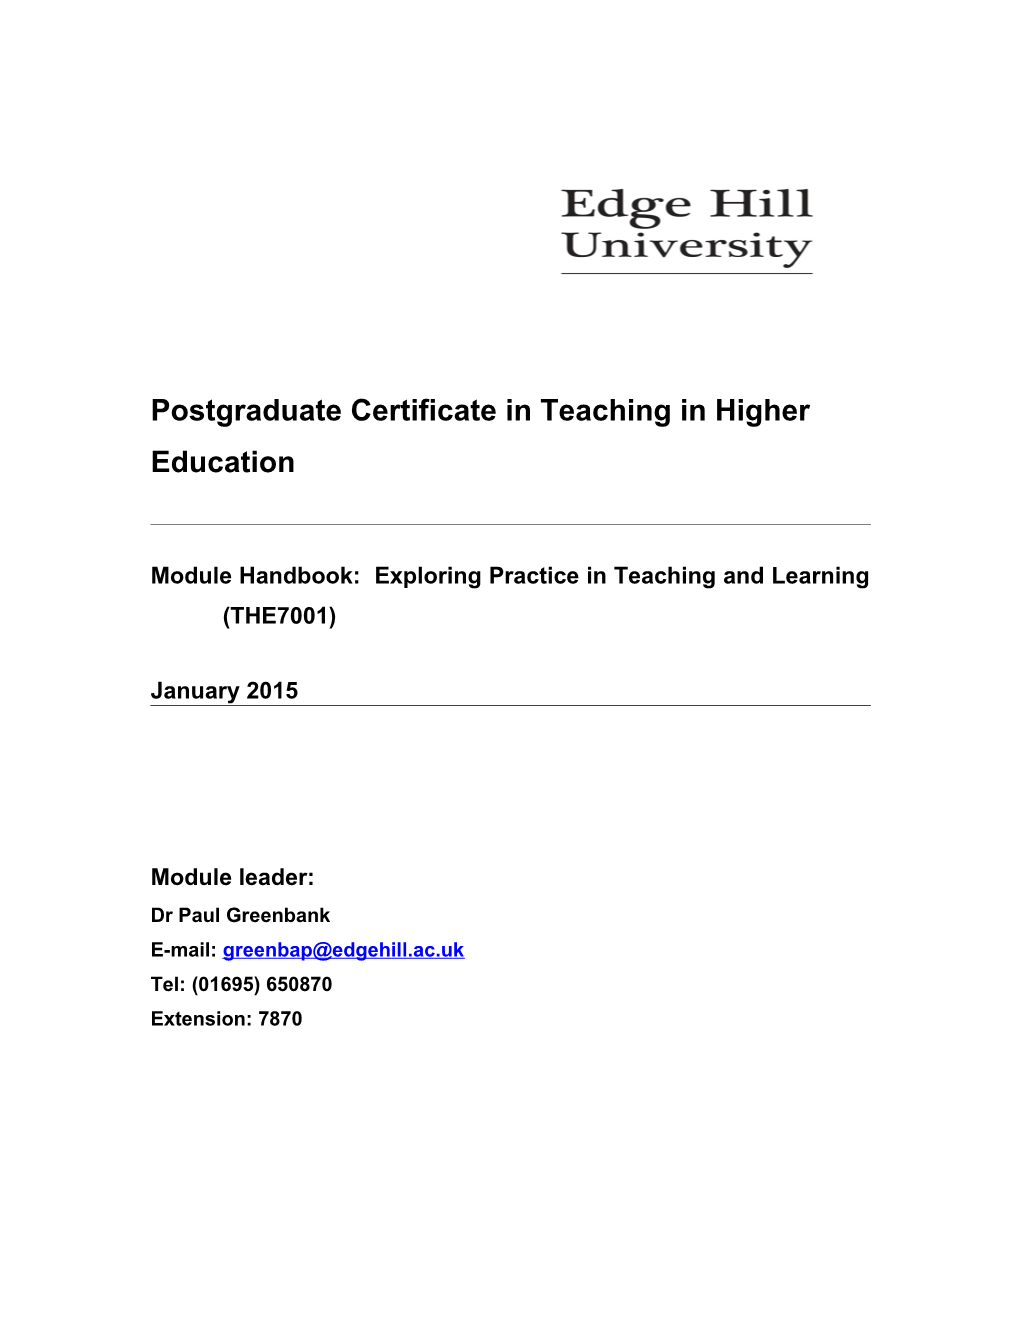 CPD POSTGRADUATE PROGRAMME: Postgraduate Teaching and Learning Support in Higher Education